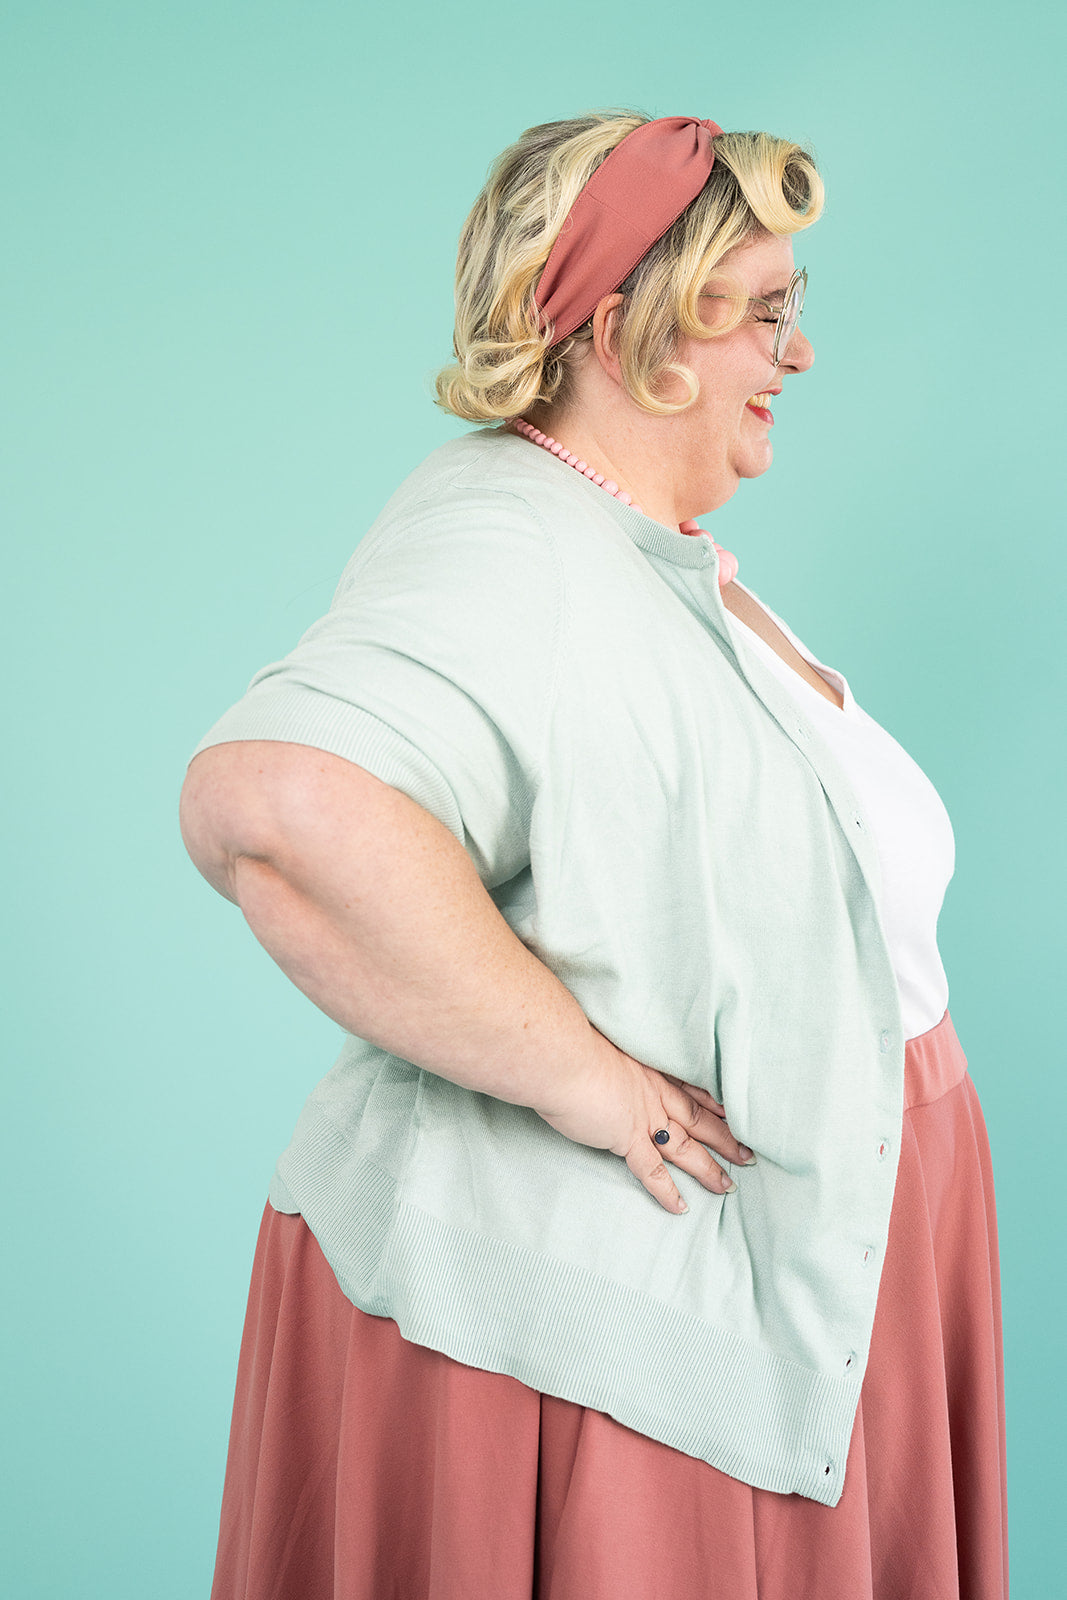 A plus-size blonde woman is standing with her hands on her hips and smiling. She is wearing a light blue cardigan, a white tshirt and a pink skirt